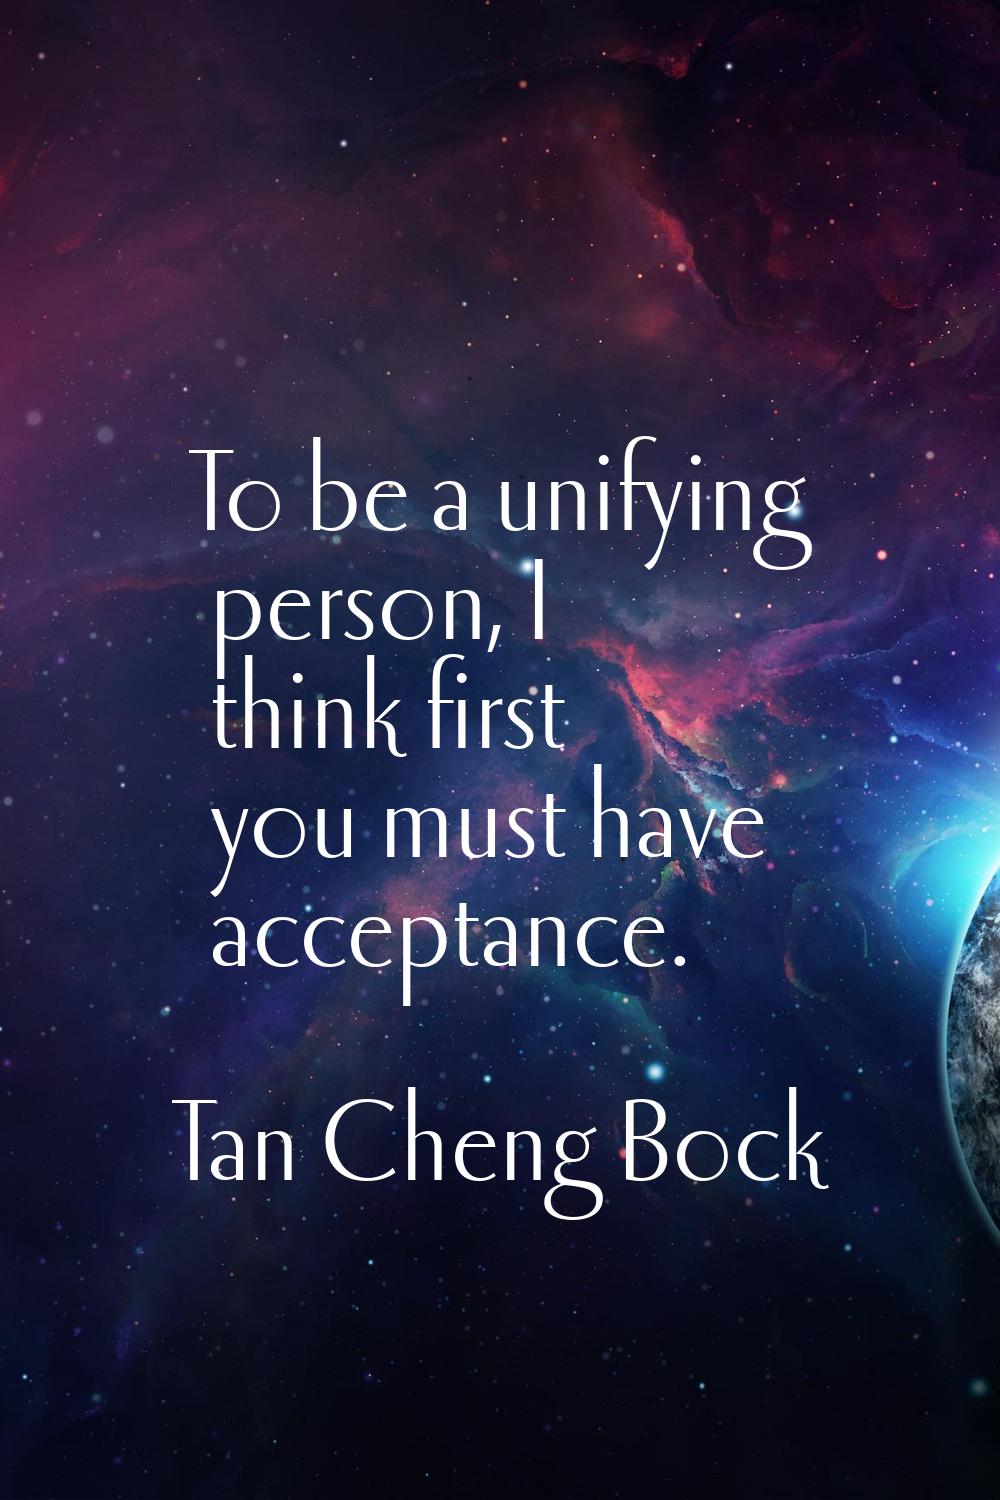 To be a unifying person, I think first you must have acceptance.